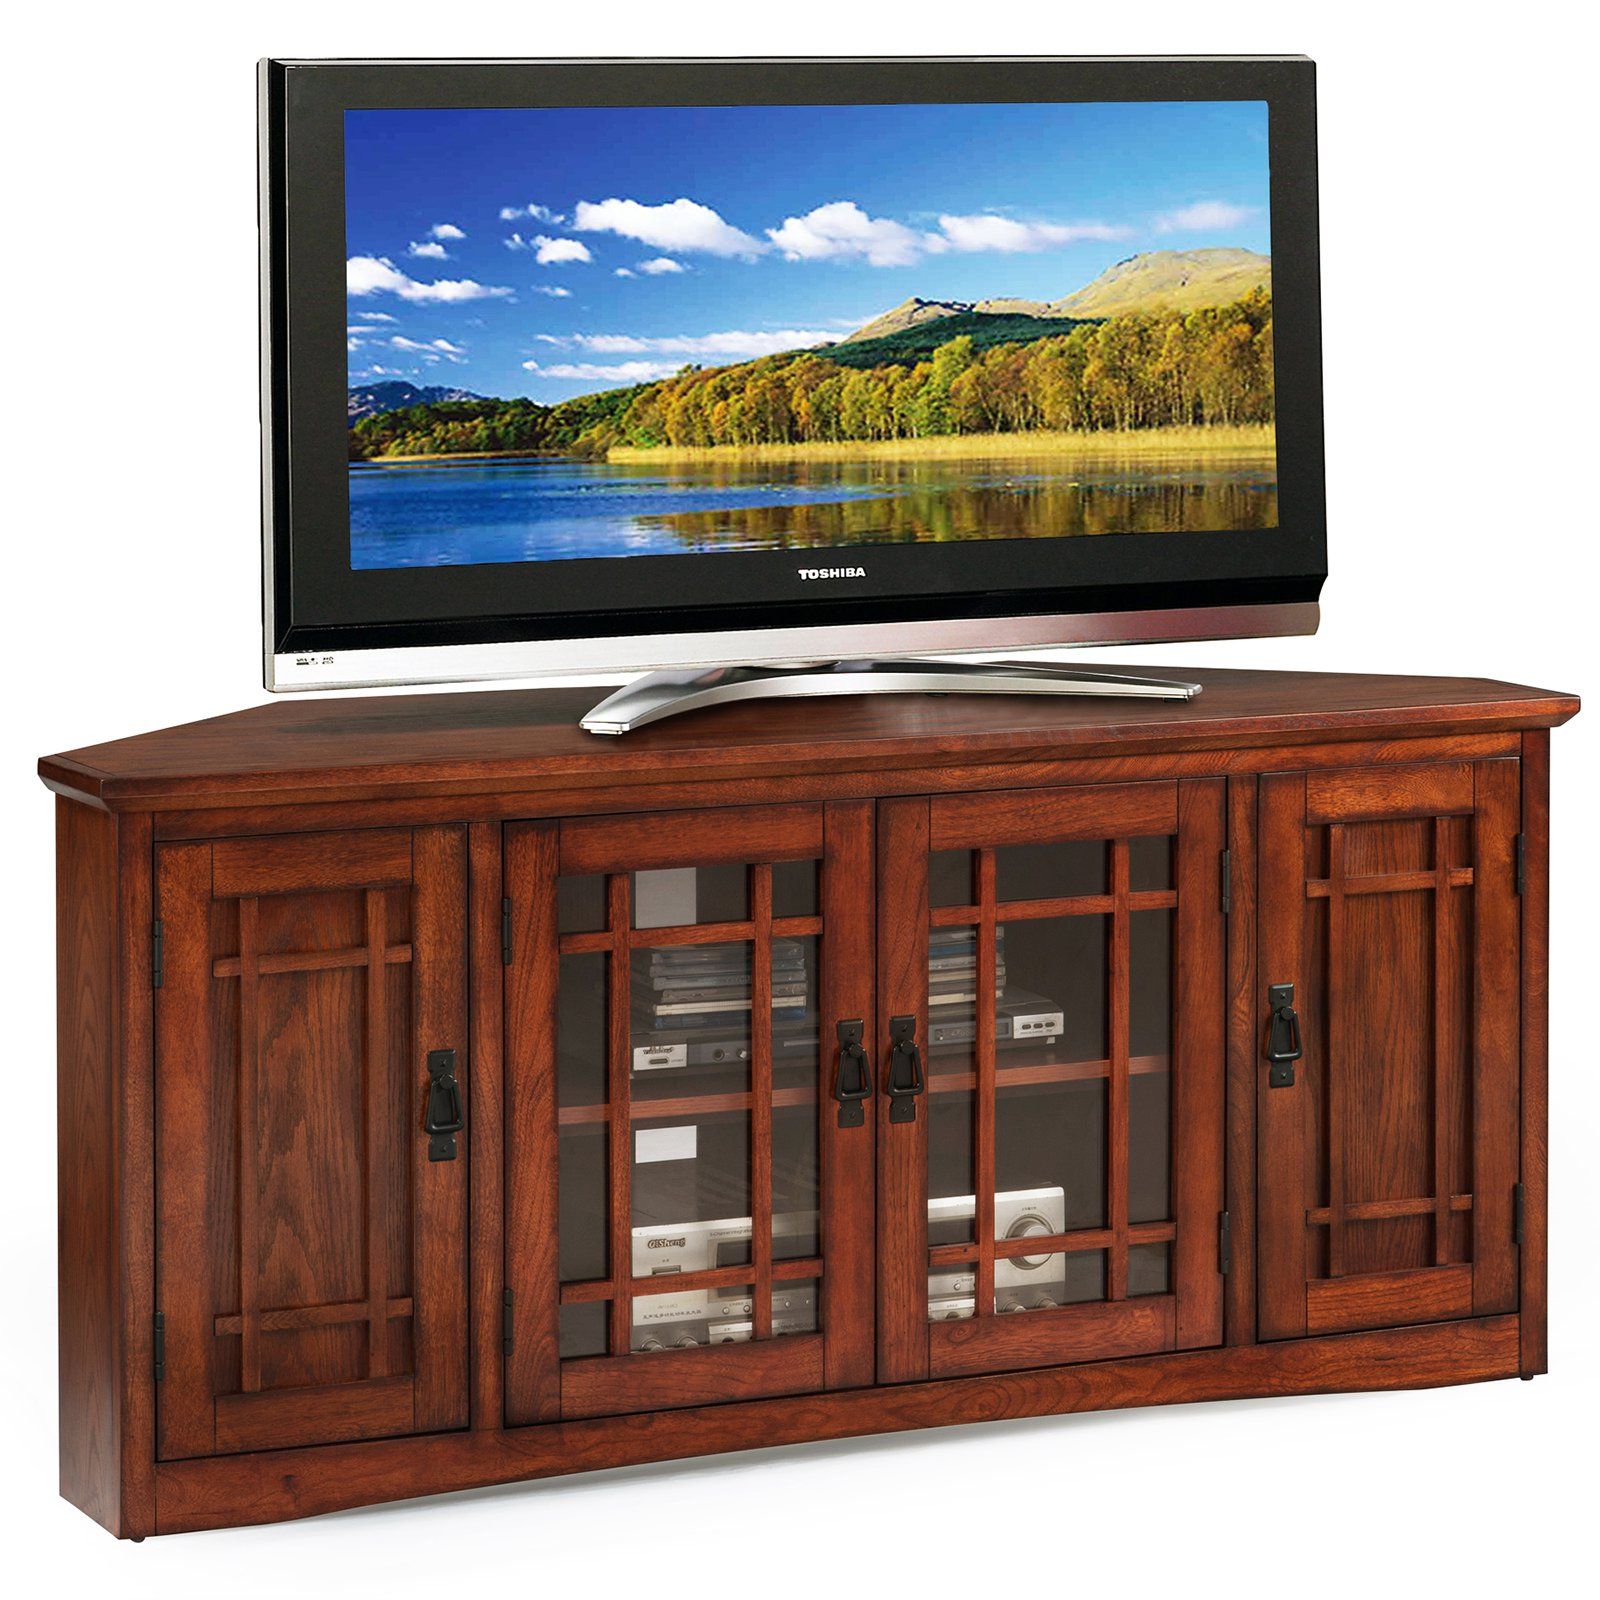 Leick Home 56" Corner Tv Stand For Tv's Up To 60", Mission Intended For Corner Tv Stands (View 11 of 15)